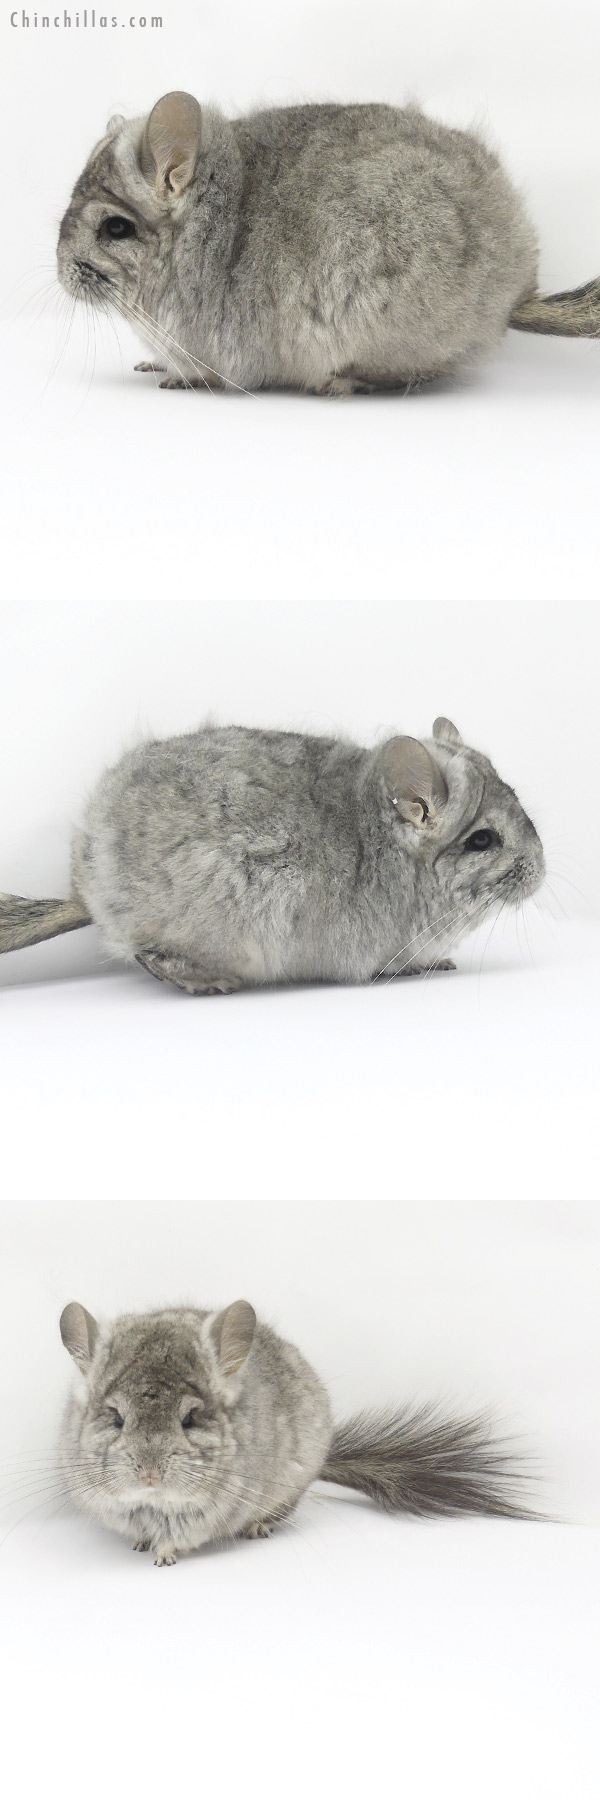 Chinchilla or related item offered for sale or export on Chinchillas.com - 19411 Standard ( Violet Carrier )  Royal Persian Angora Female Chinchilla